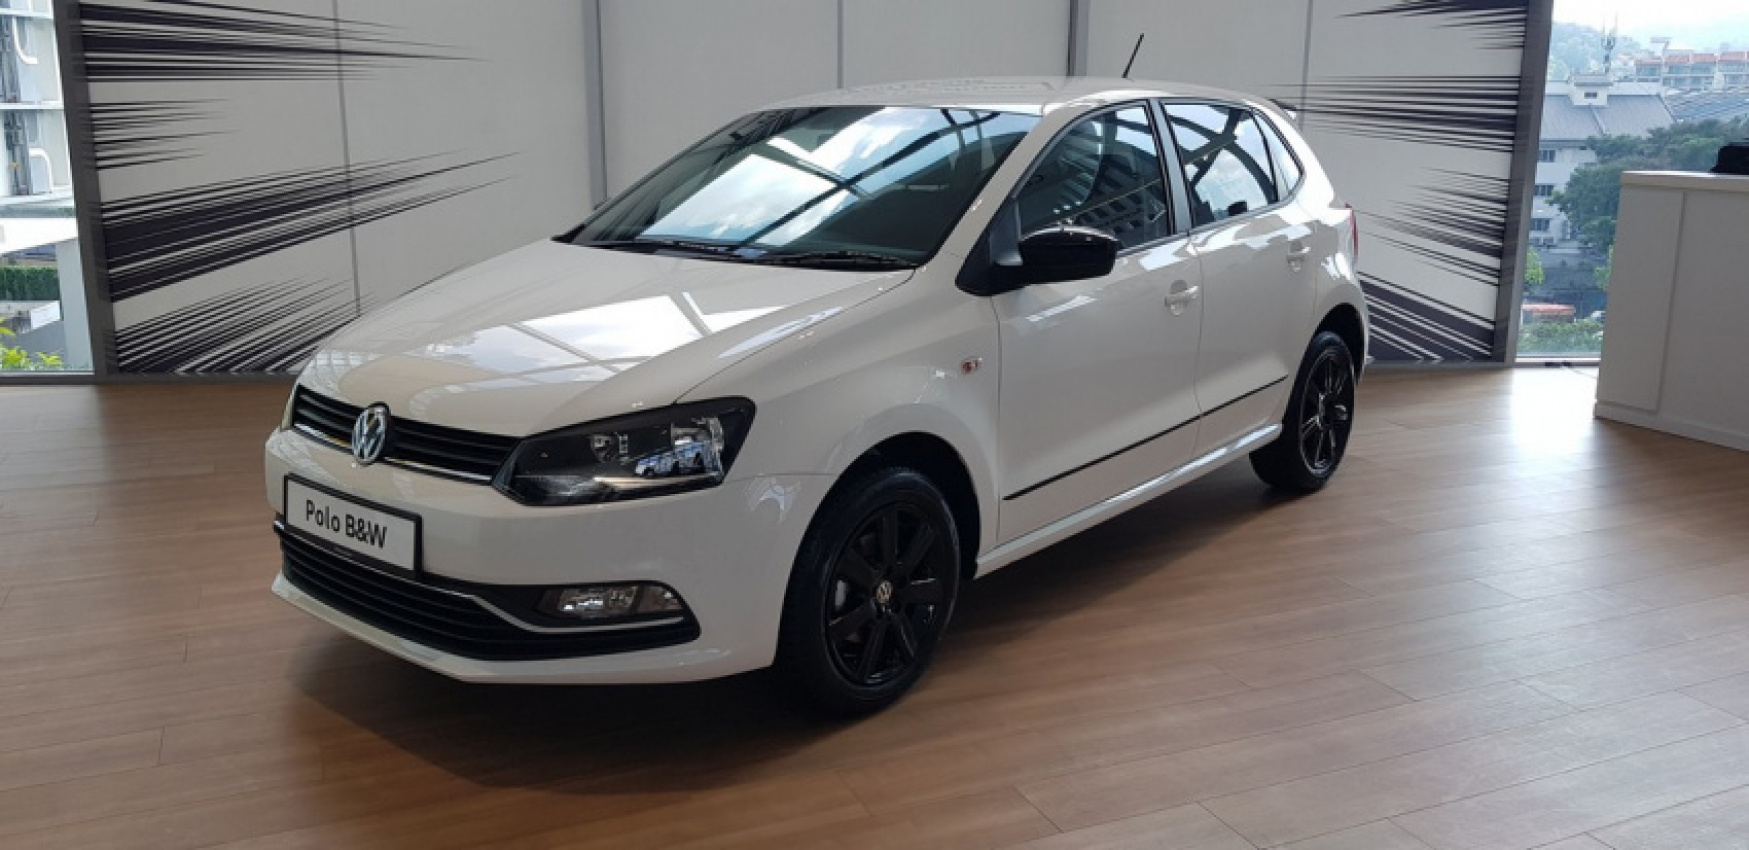 autos, car brands, cars, volkswagen, lazada, promotions, sale, volkswagen passenger cars malaysia, vpcm, volkswagen special edition polo black & white sold out in a minute on lazada